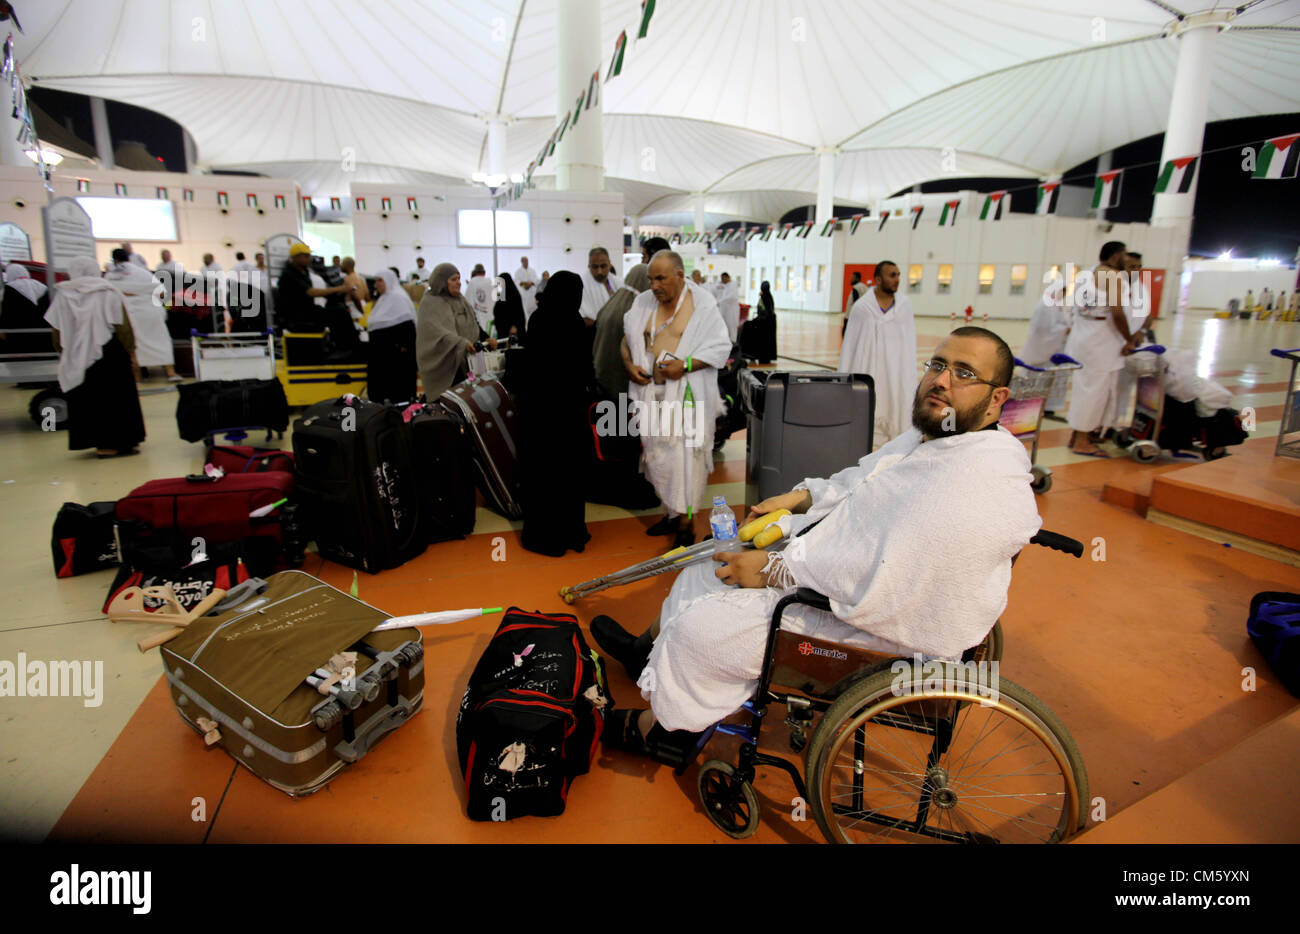 Oct. 11, 2012 - Jeddah, Jeddah, Saudi Arabia - Palestinian Muslim pilgrims arrive at the King Abdulaziz international airport as they prepare to go for their pilgrimage to Mecca, Oct. 12,2012. The event is held in preparation for carrying out the five pillars of Islam in the Holy Land, when they will make their Hajj to Mecca  (Credit Image: © Momen Faiz/APA Images/ZUMAPRESS.com) Stock Photo